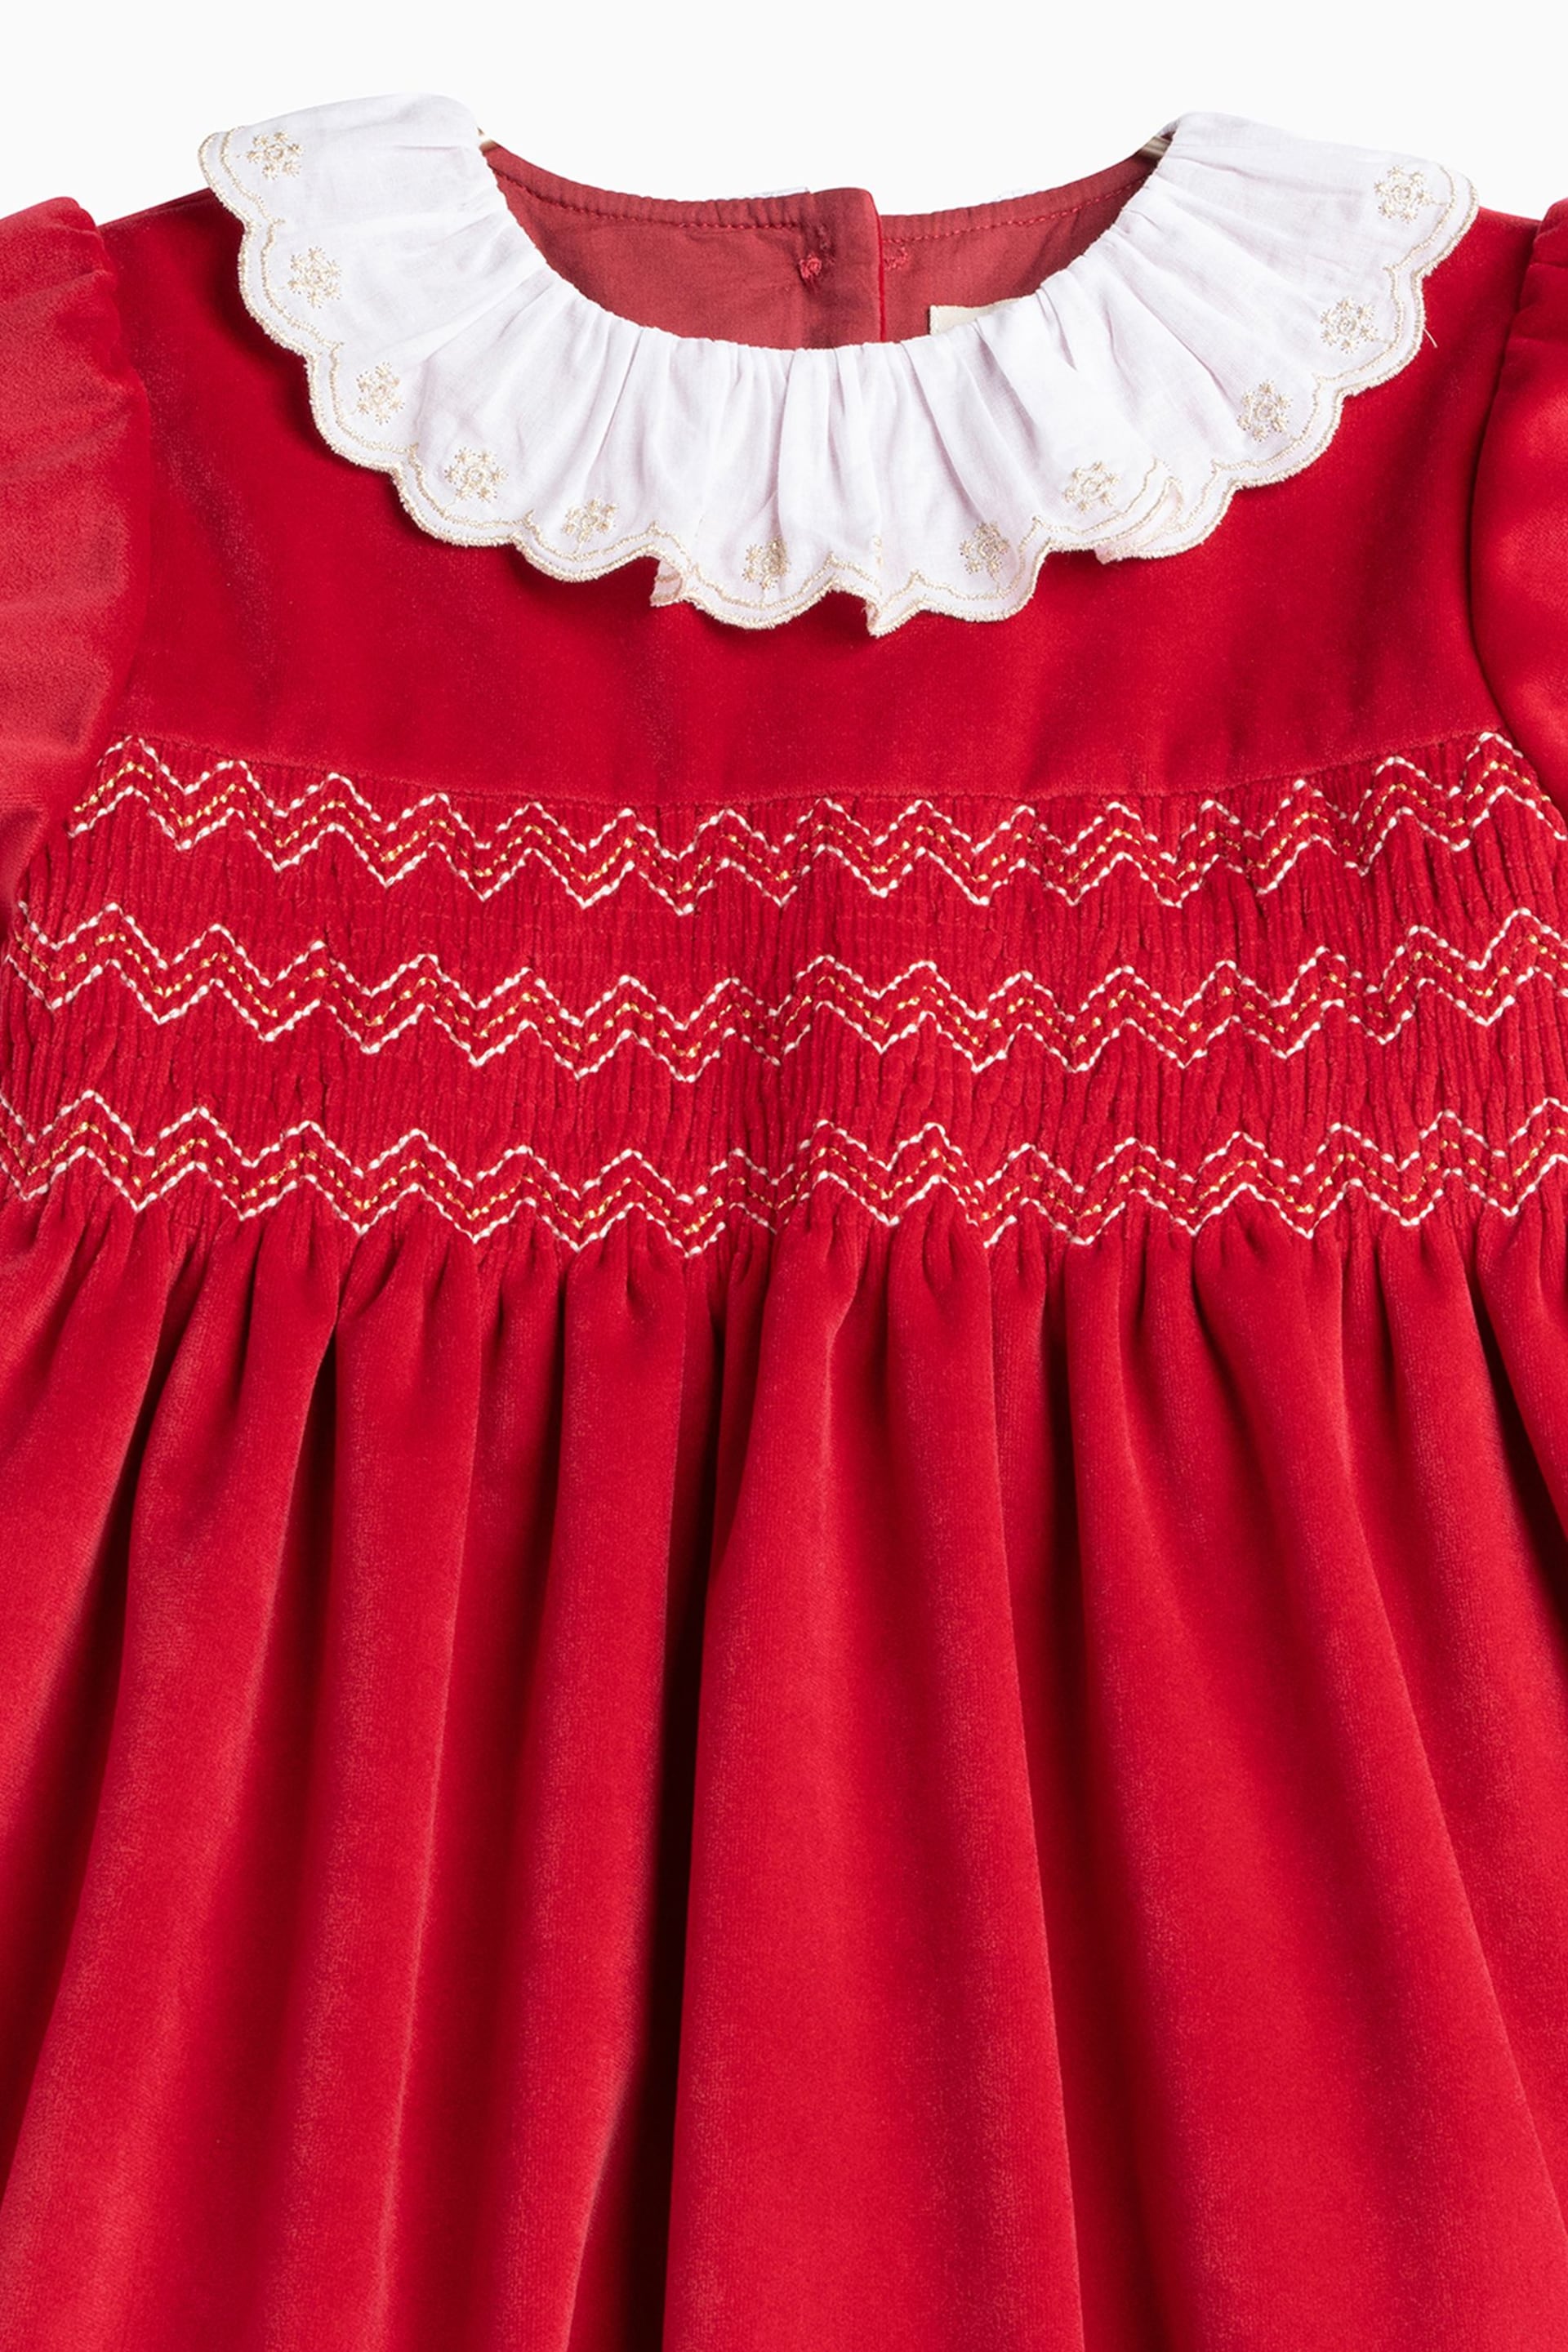 Trotters London Red Velvet Christmas Party Dress - Image 7 of 7